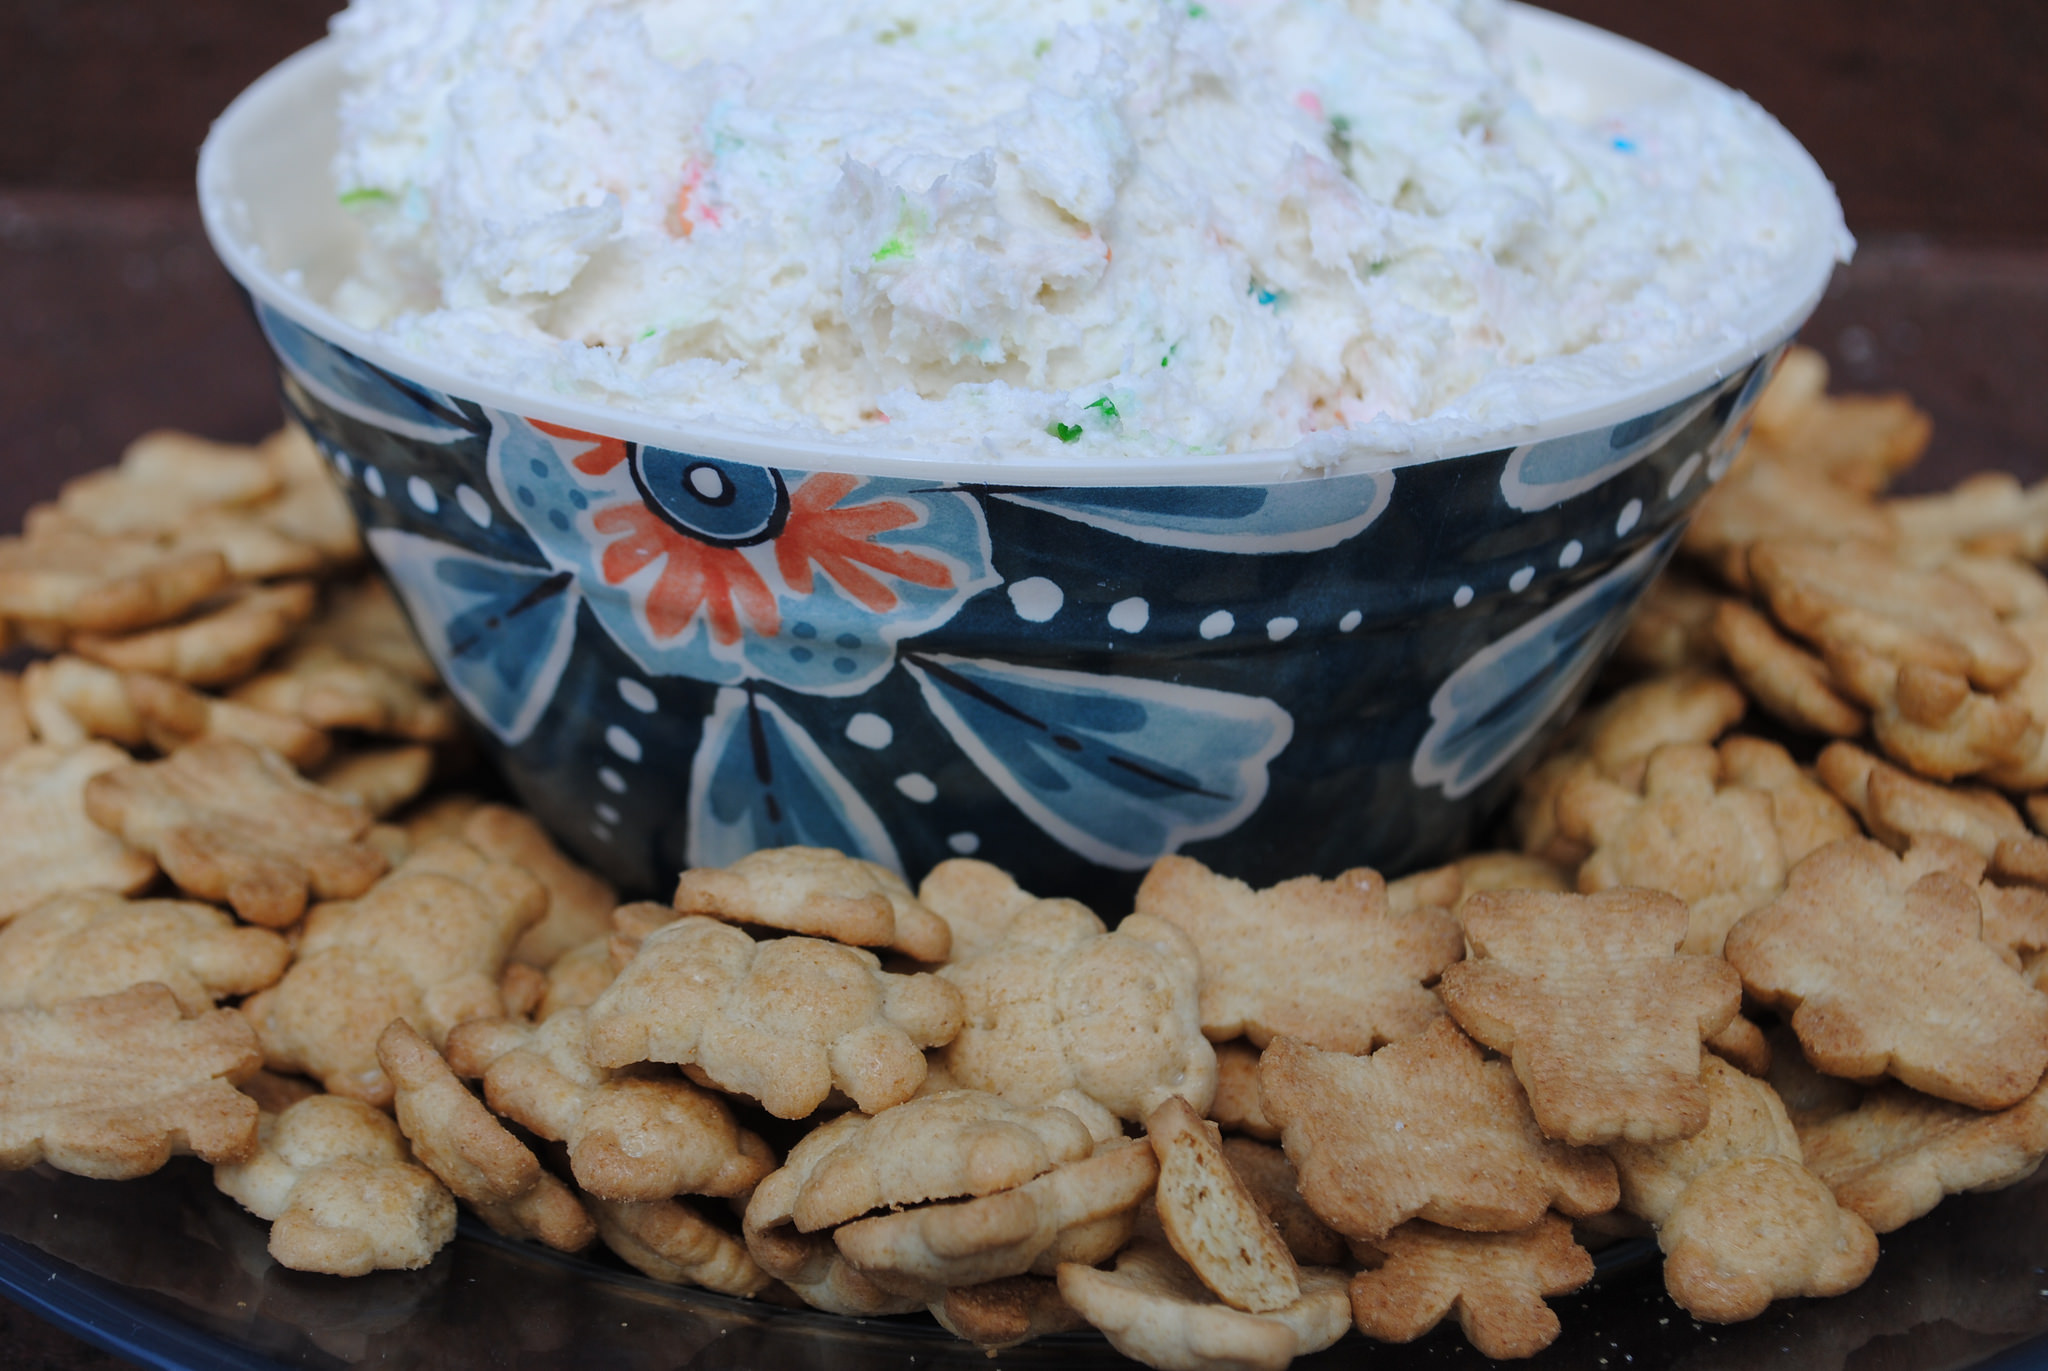 This 3-Ingredient Dunkaroo Dip Will Have You Partying Like it’s 1996